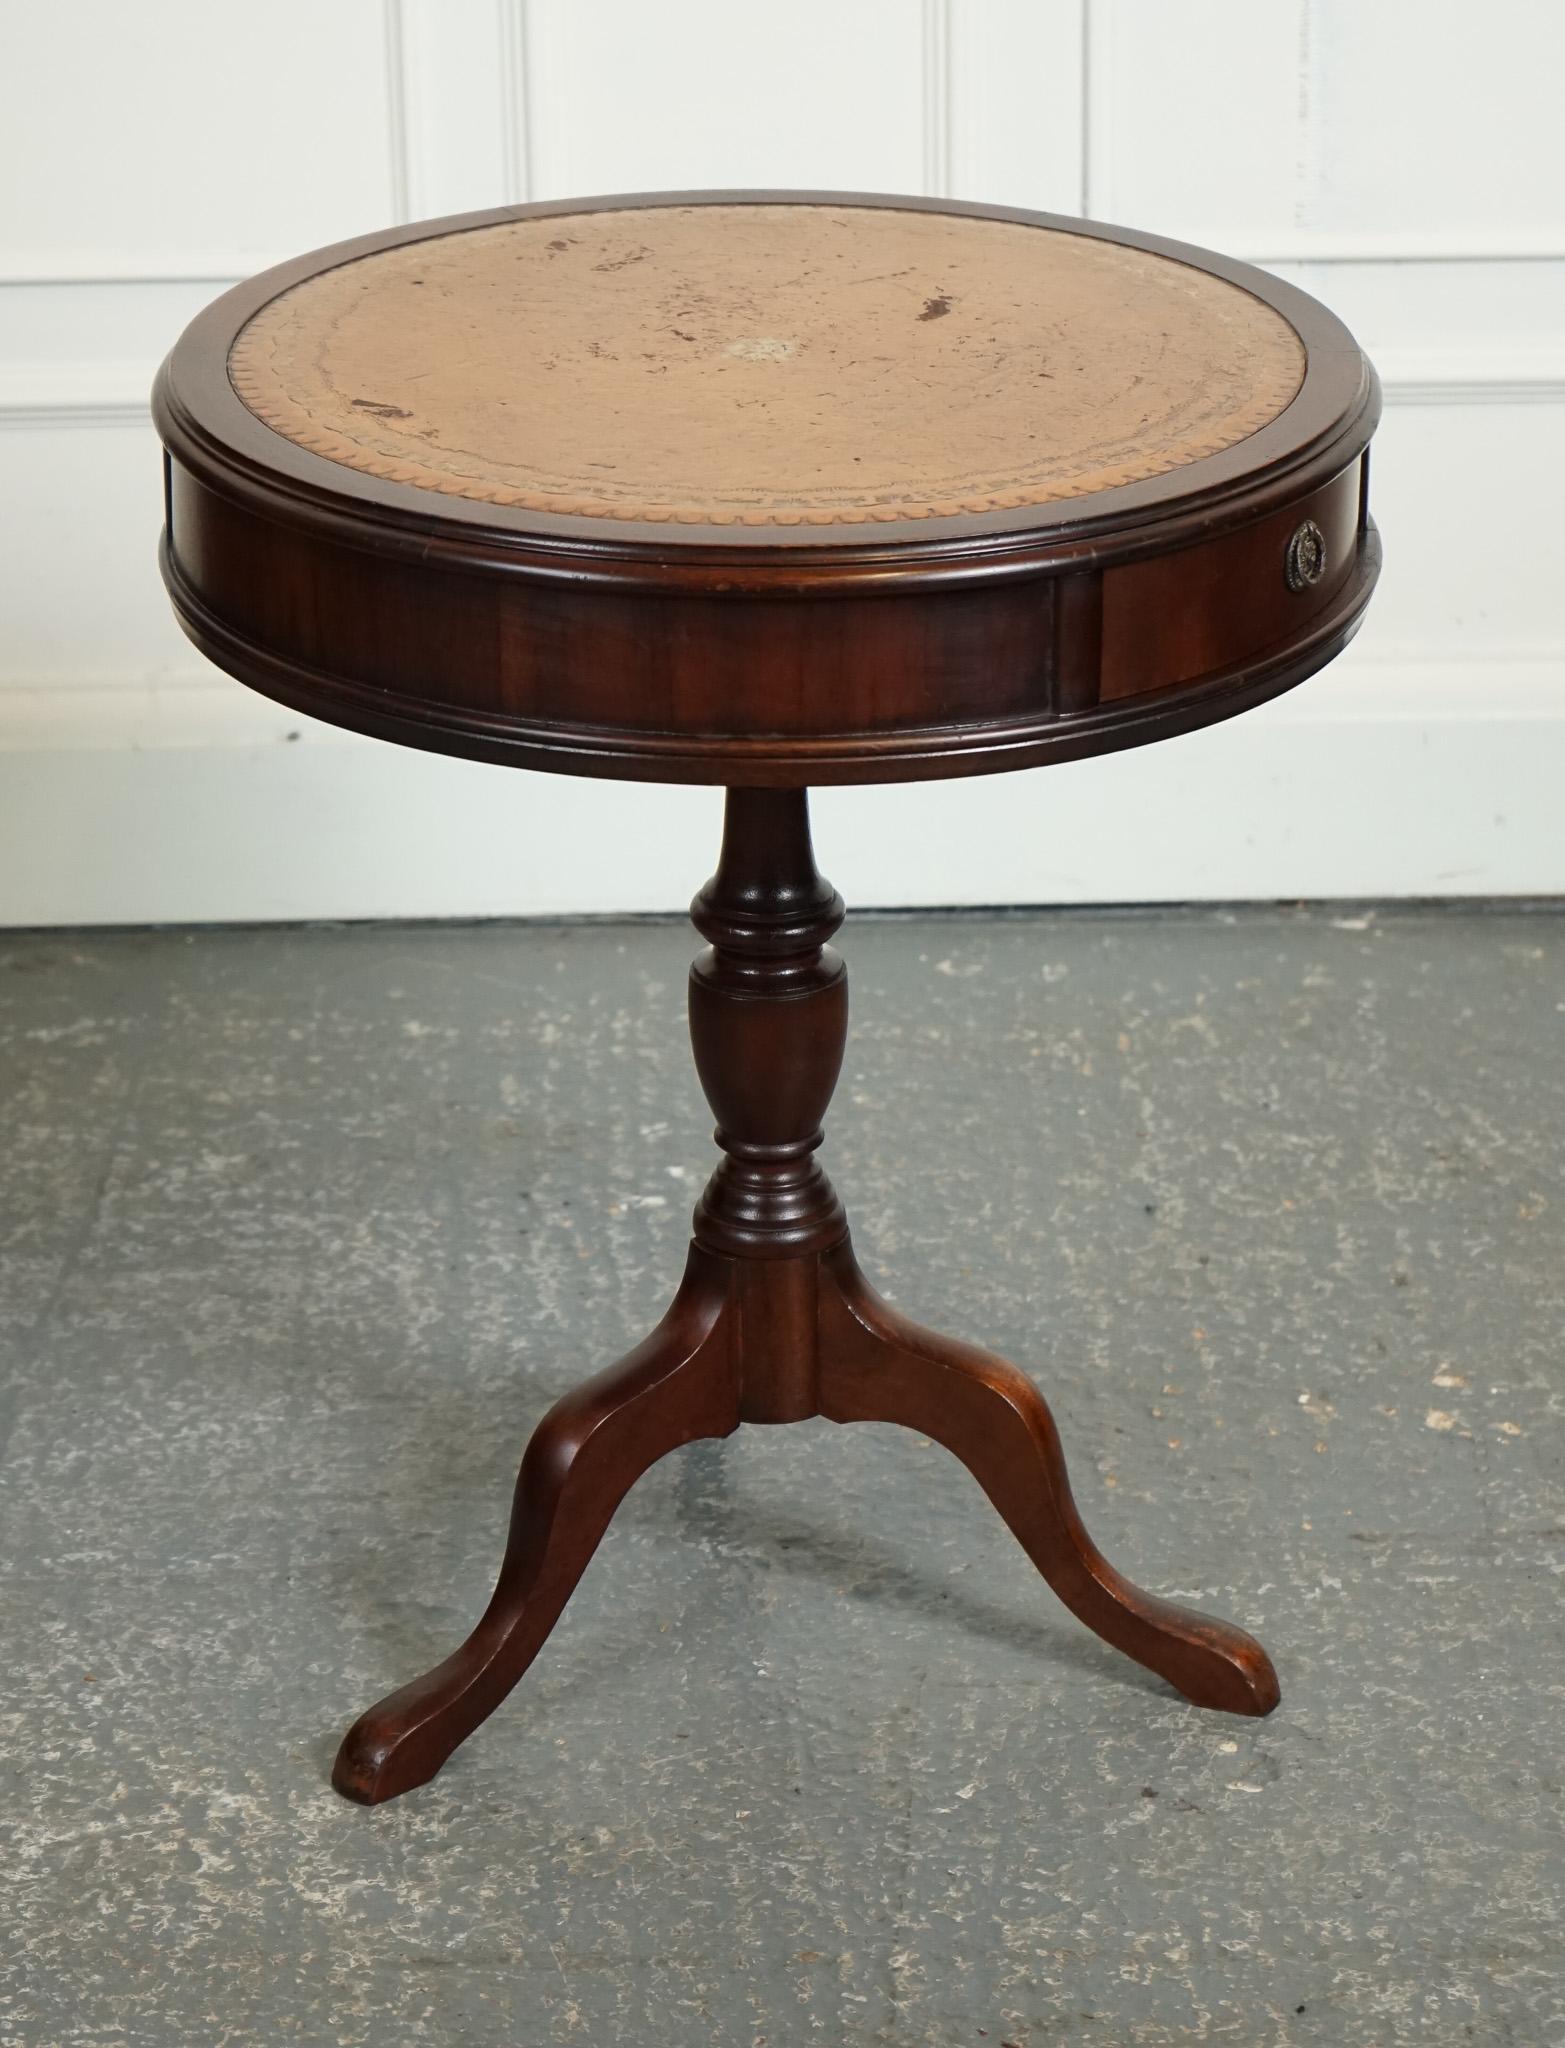 
We are delighted to offer for sale this Vintage Drum Side End Table Lamp And Wine Table Features.

 A charming blend of functionality and style. With a distinctive brown leather top, this piece exudes a warm and inviting appeal that adds character